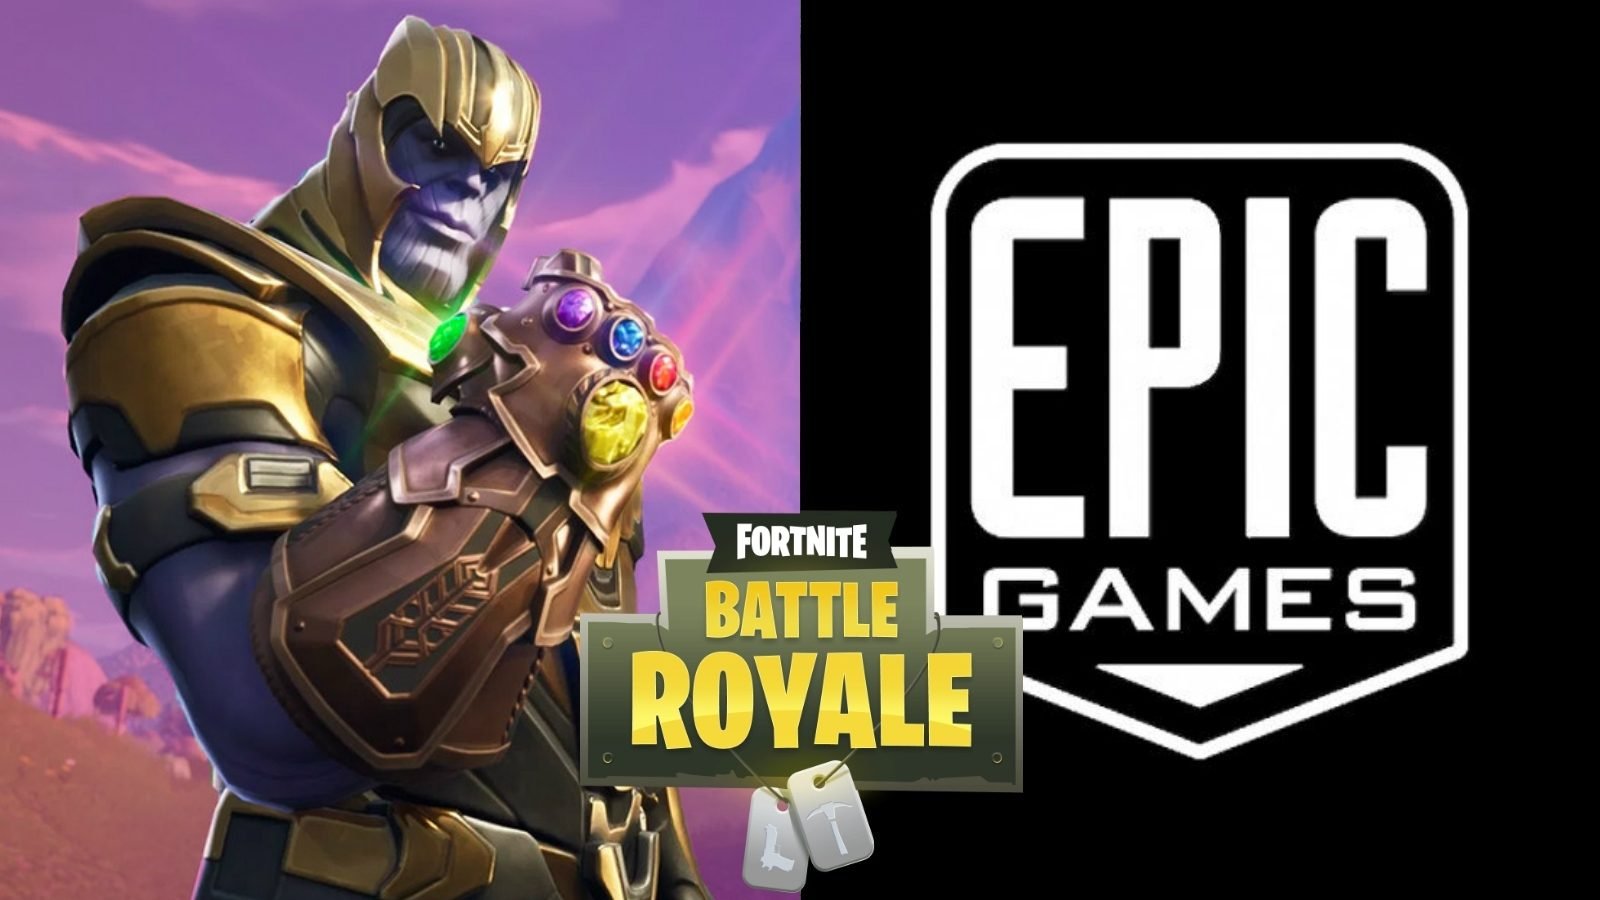 Epic Games Employees Worked 100 Hour Weeks